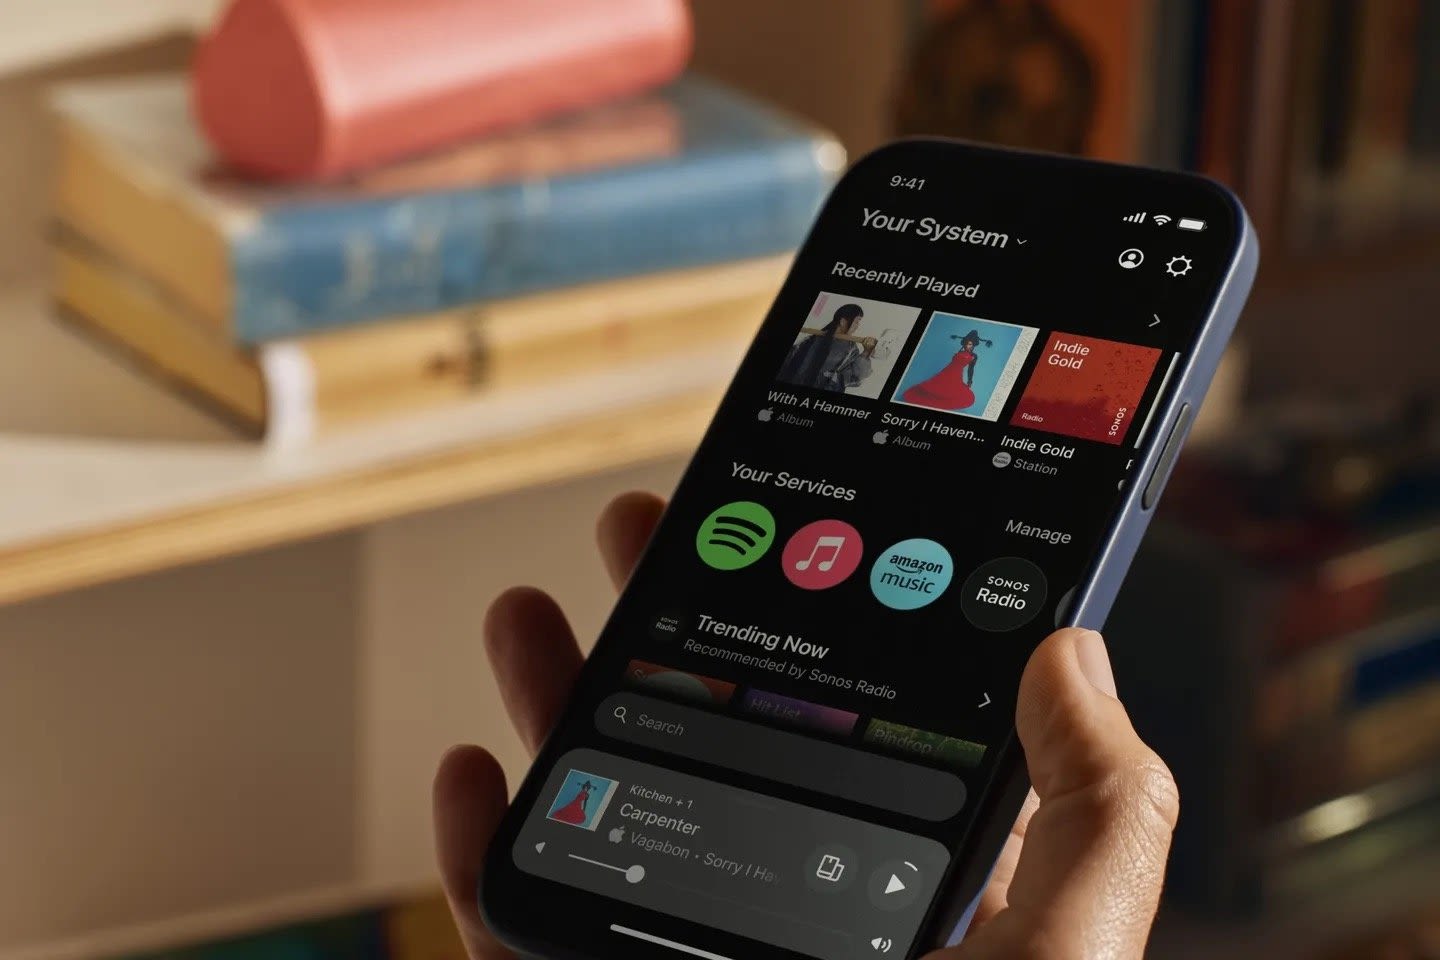 Sonos channels its inner Apple, says it took 'courage' to make its iPhone app suck